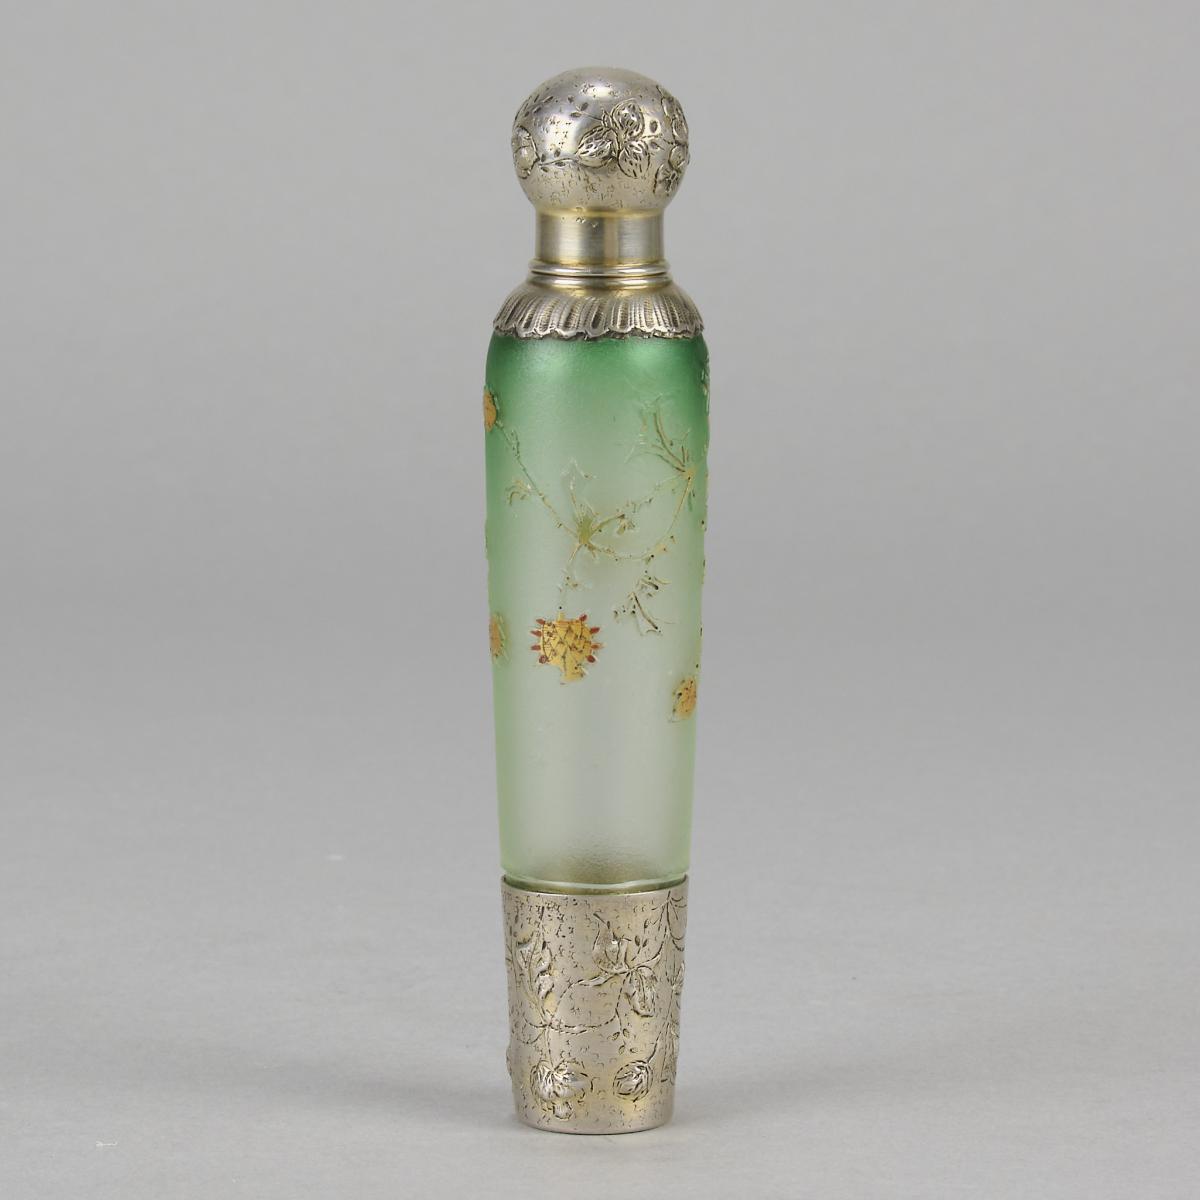 Early 20th Century French Art Nouveau Glass entitled "Absinthe Bottle" by Daum